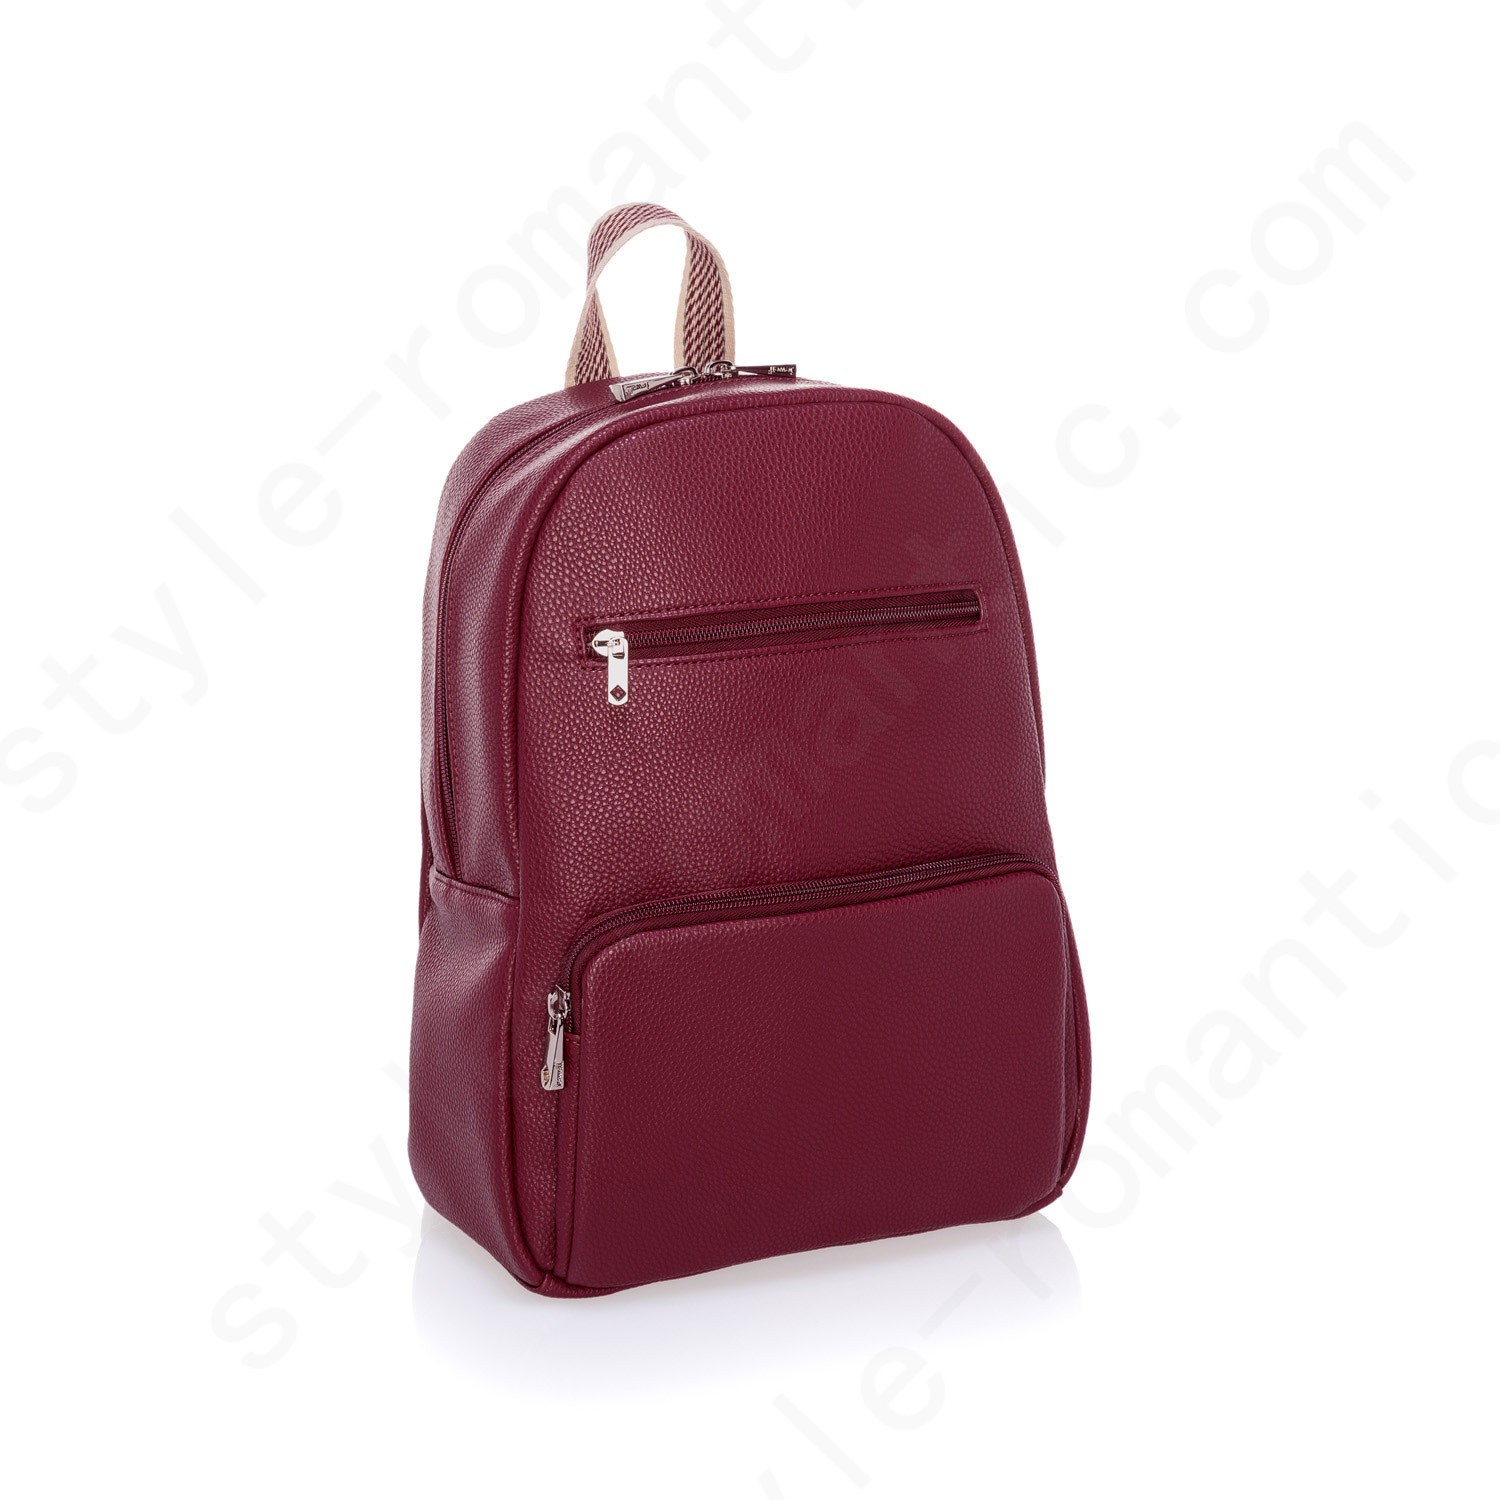 Thirty-One Gifts Boutique Backpack - Deep Merlot Pebble - Thirty-One Gifts Boutique Backpack - Deep Merlot Pebble